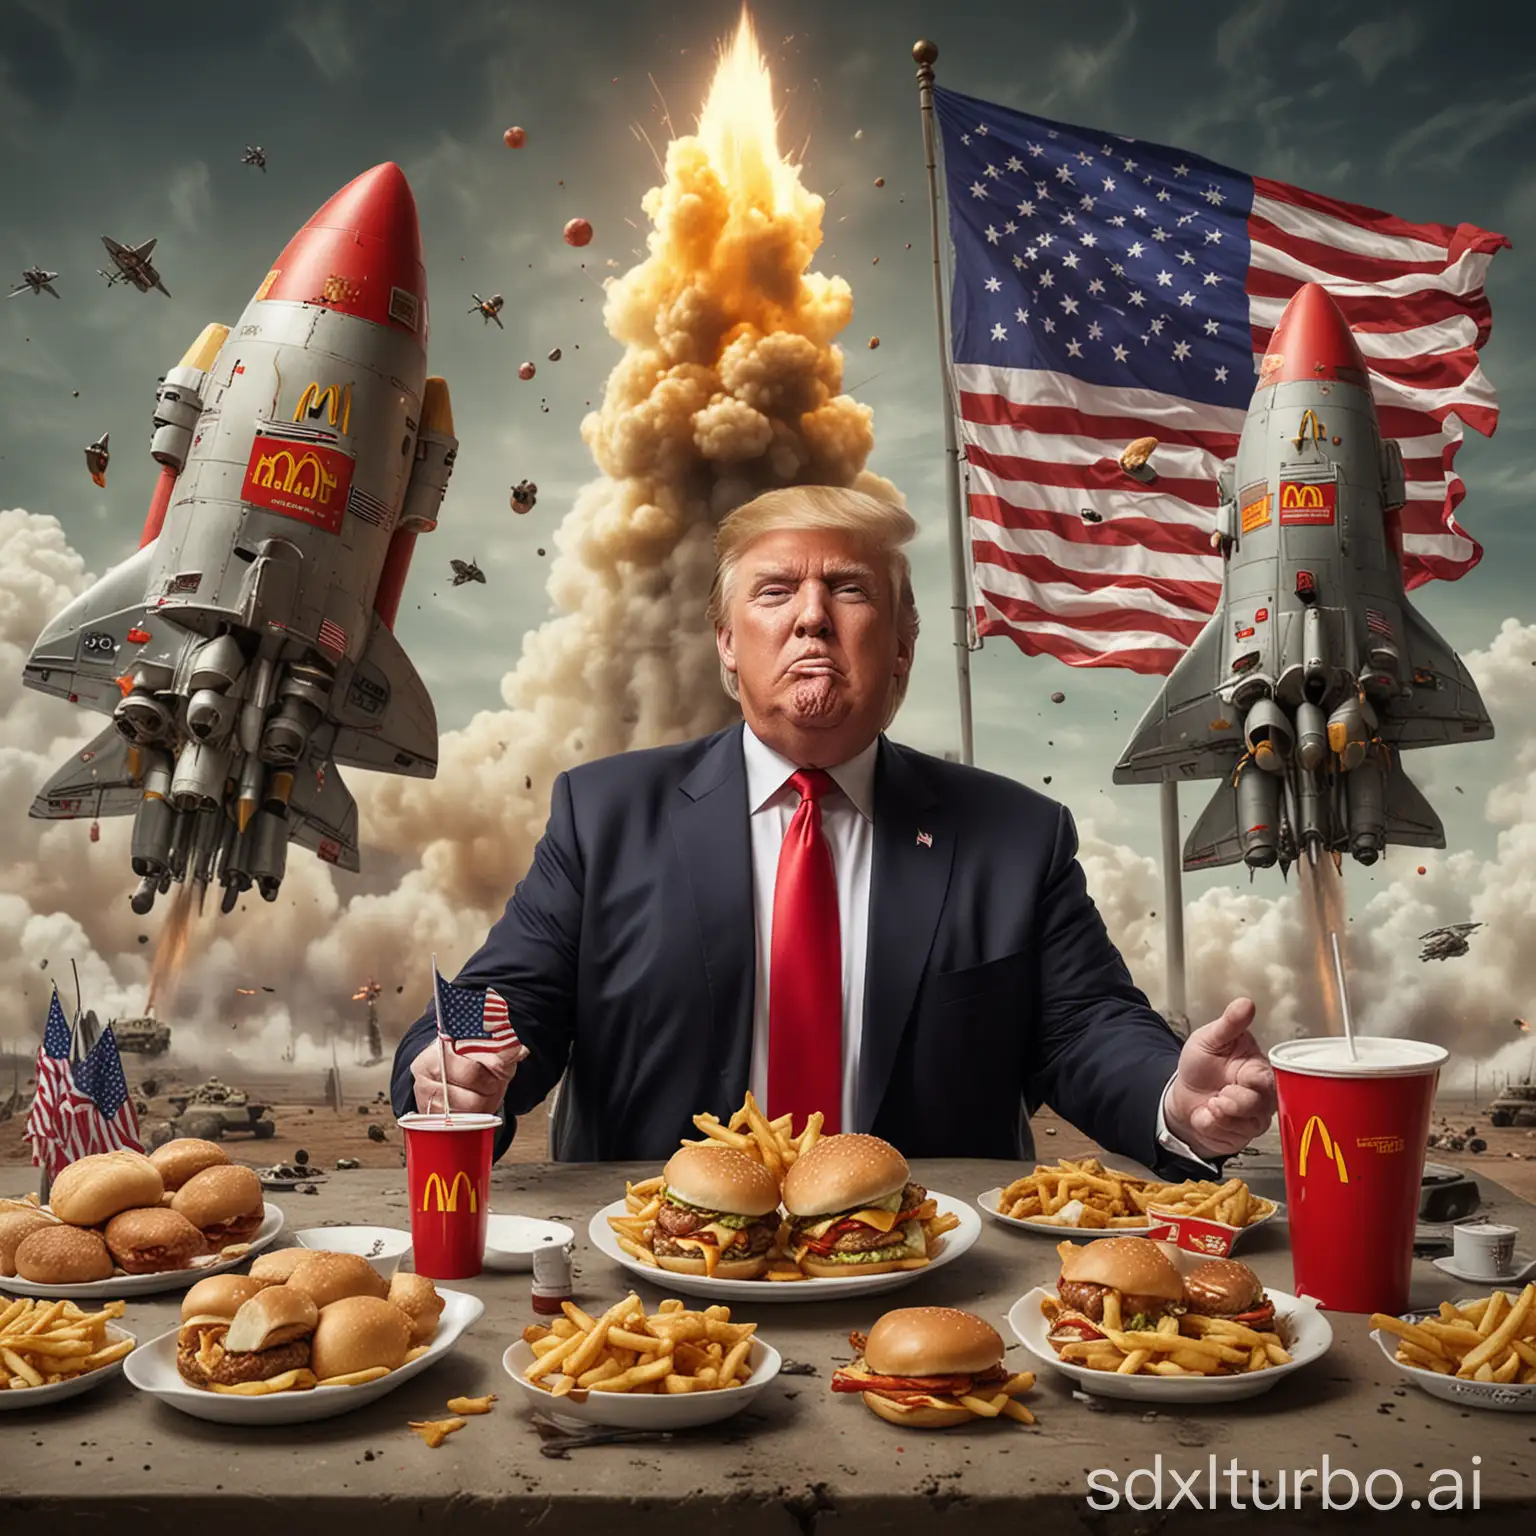 Donald-Trump-Eating-McDonalds-with-Rockets-and-Nuclear-Warheads-Launching